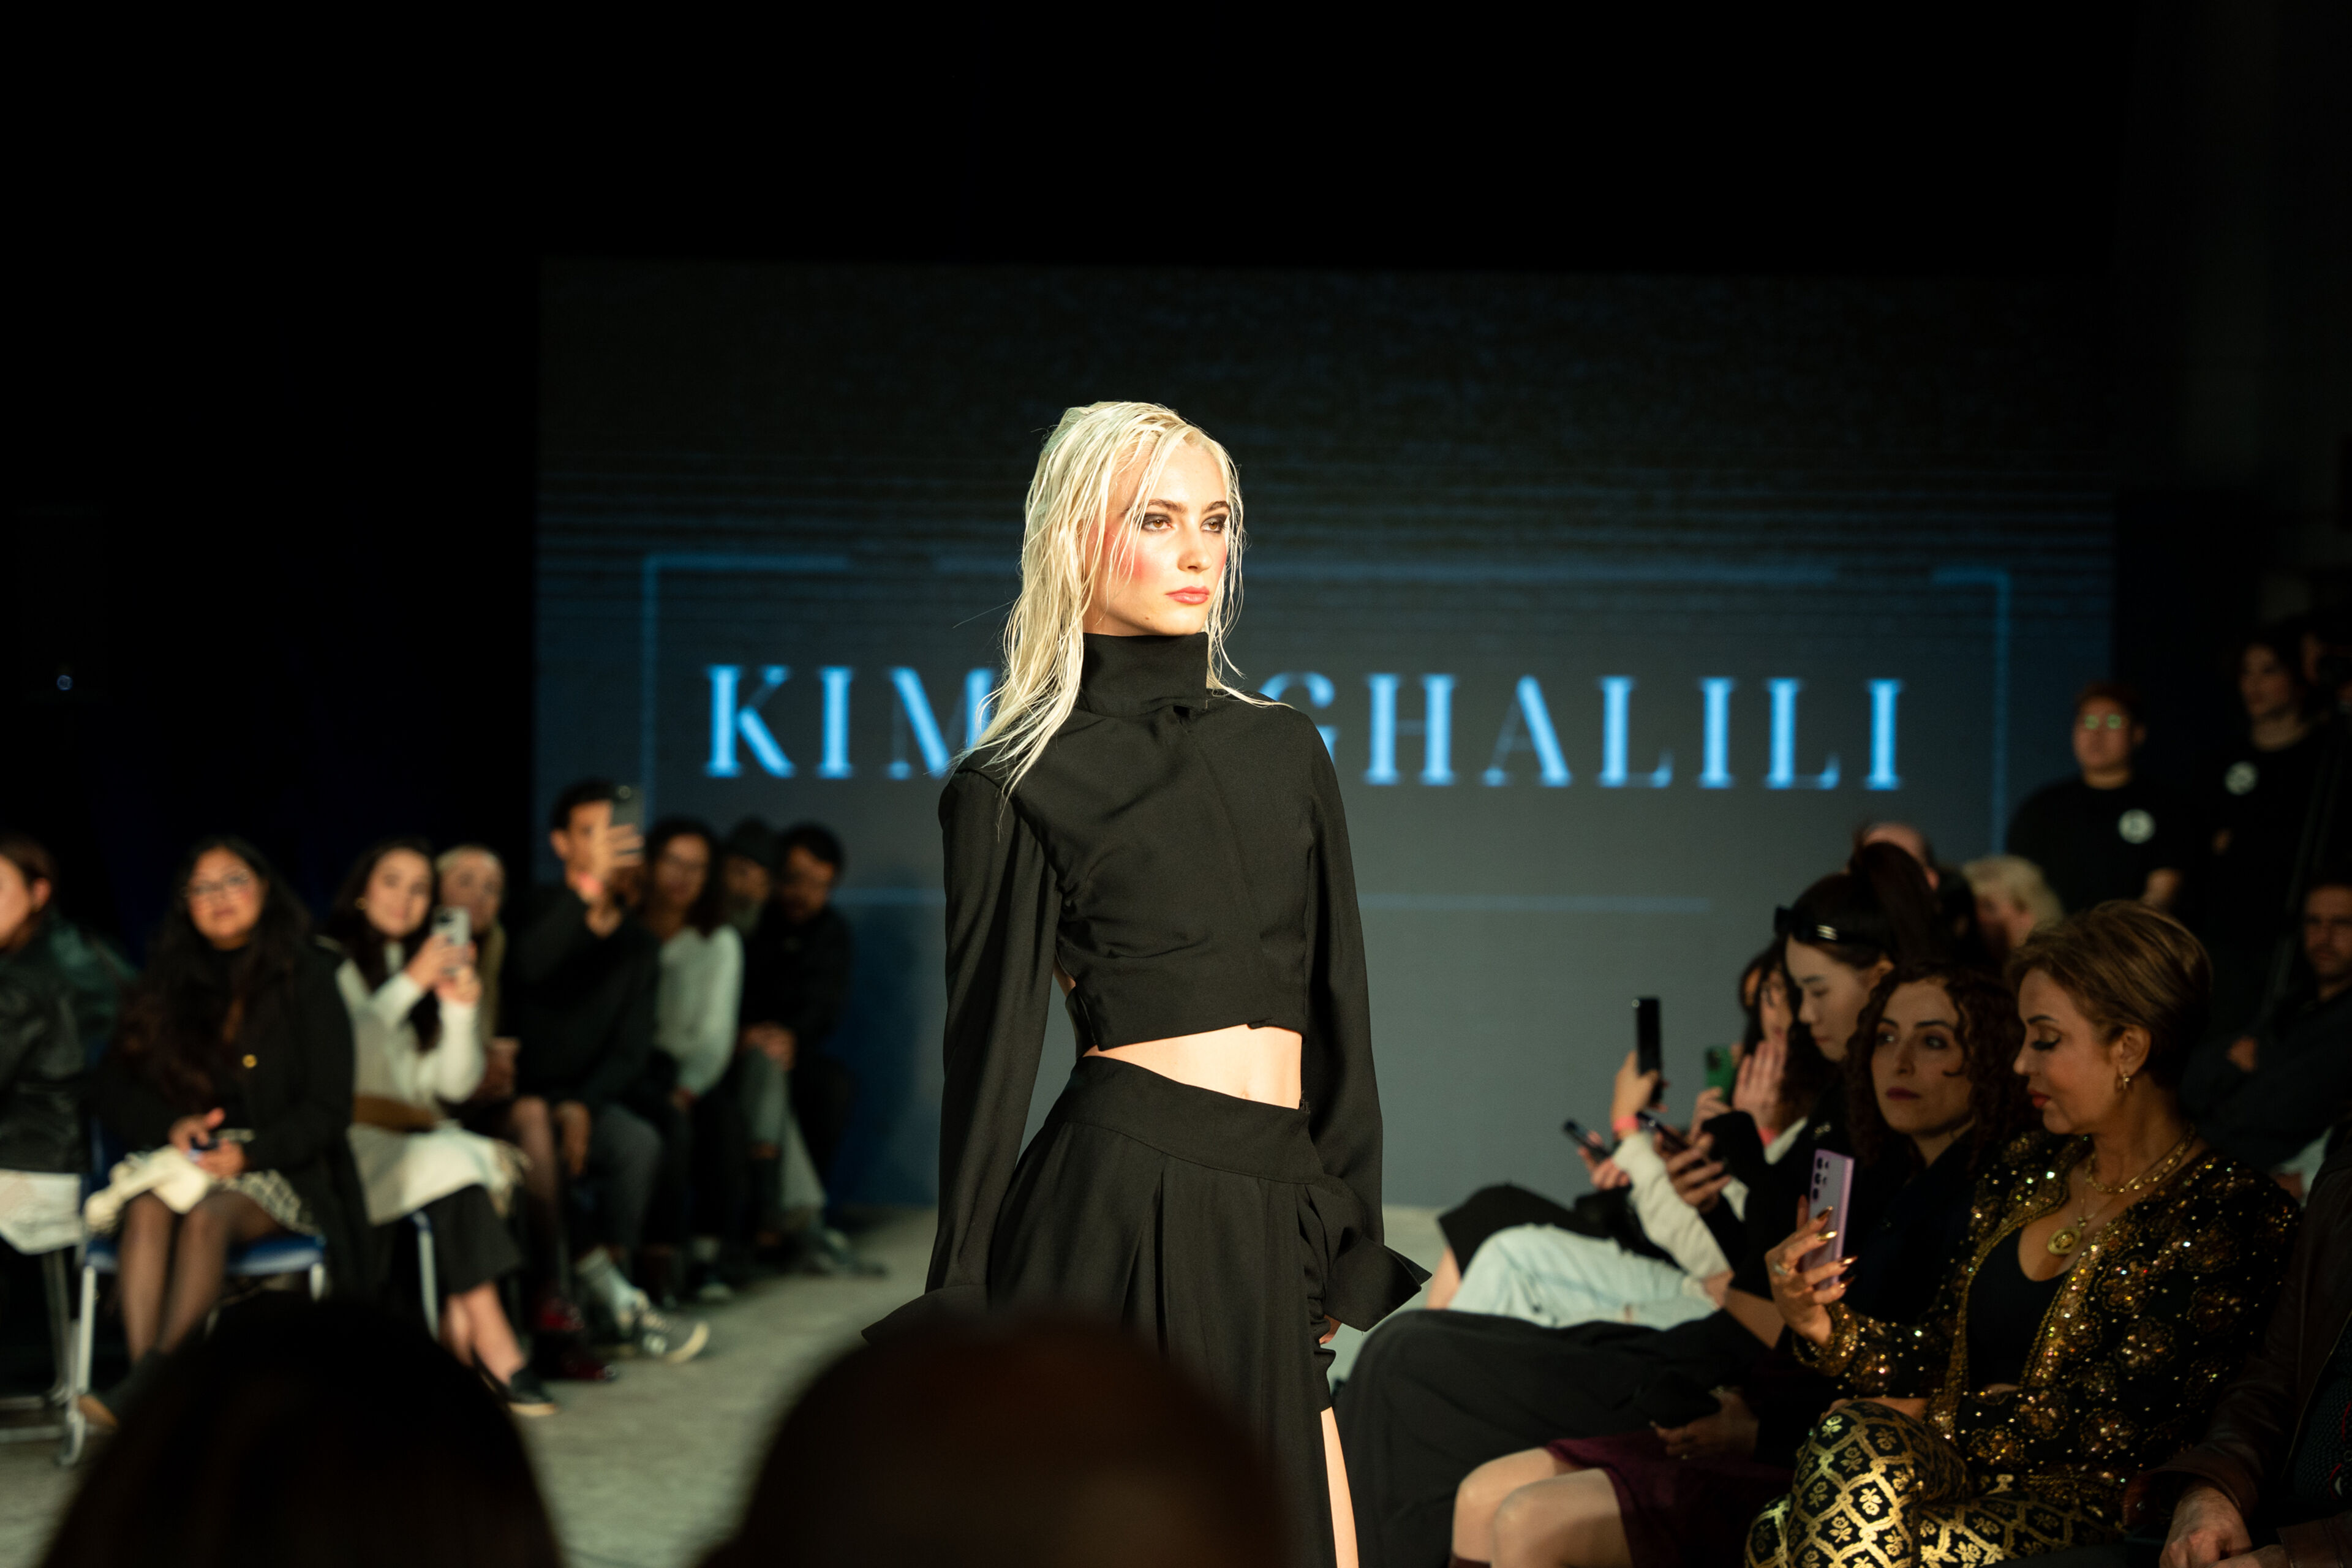 Model showcasing a black crop top ensemble on the runway during a fashion show, with attentive audience in the background.